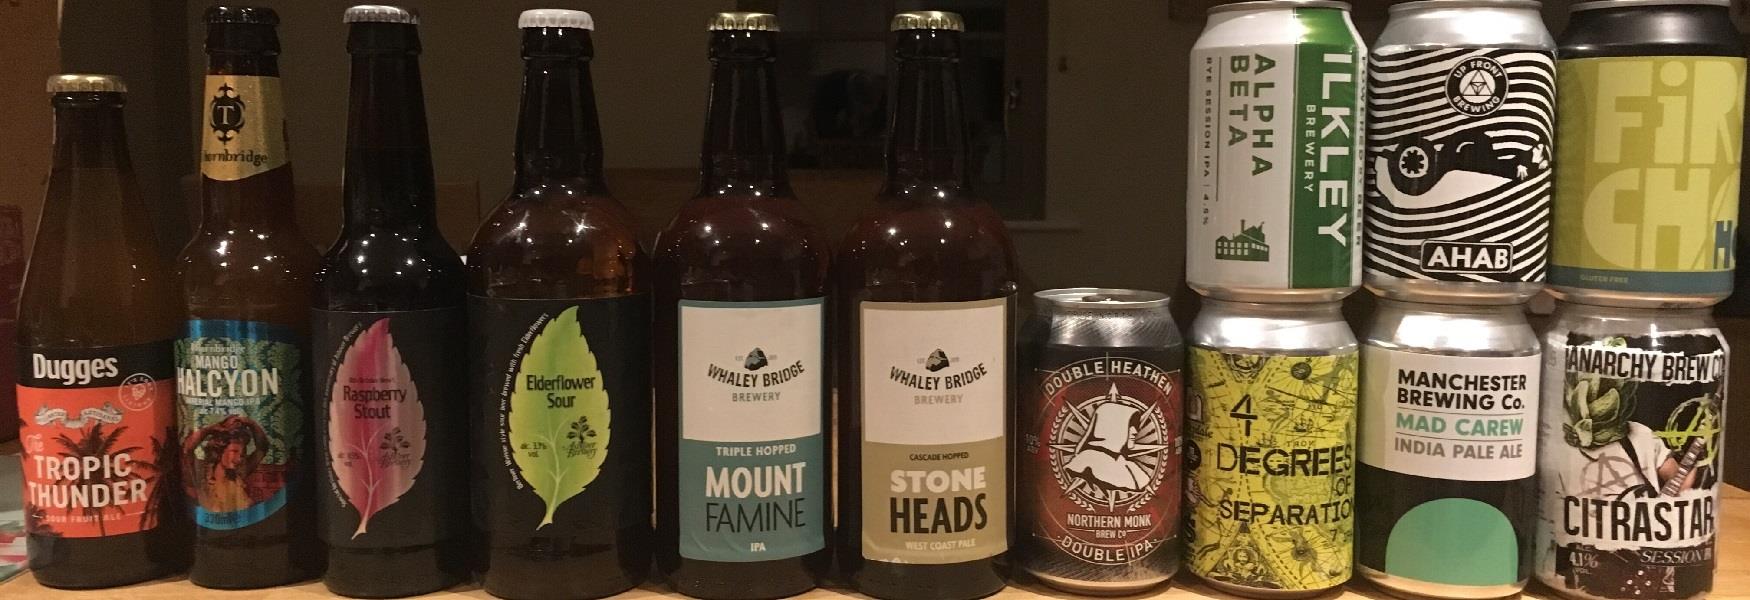 Locally brewed beers